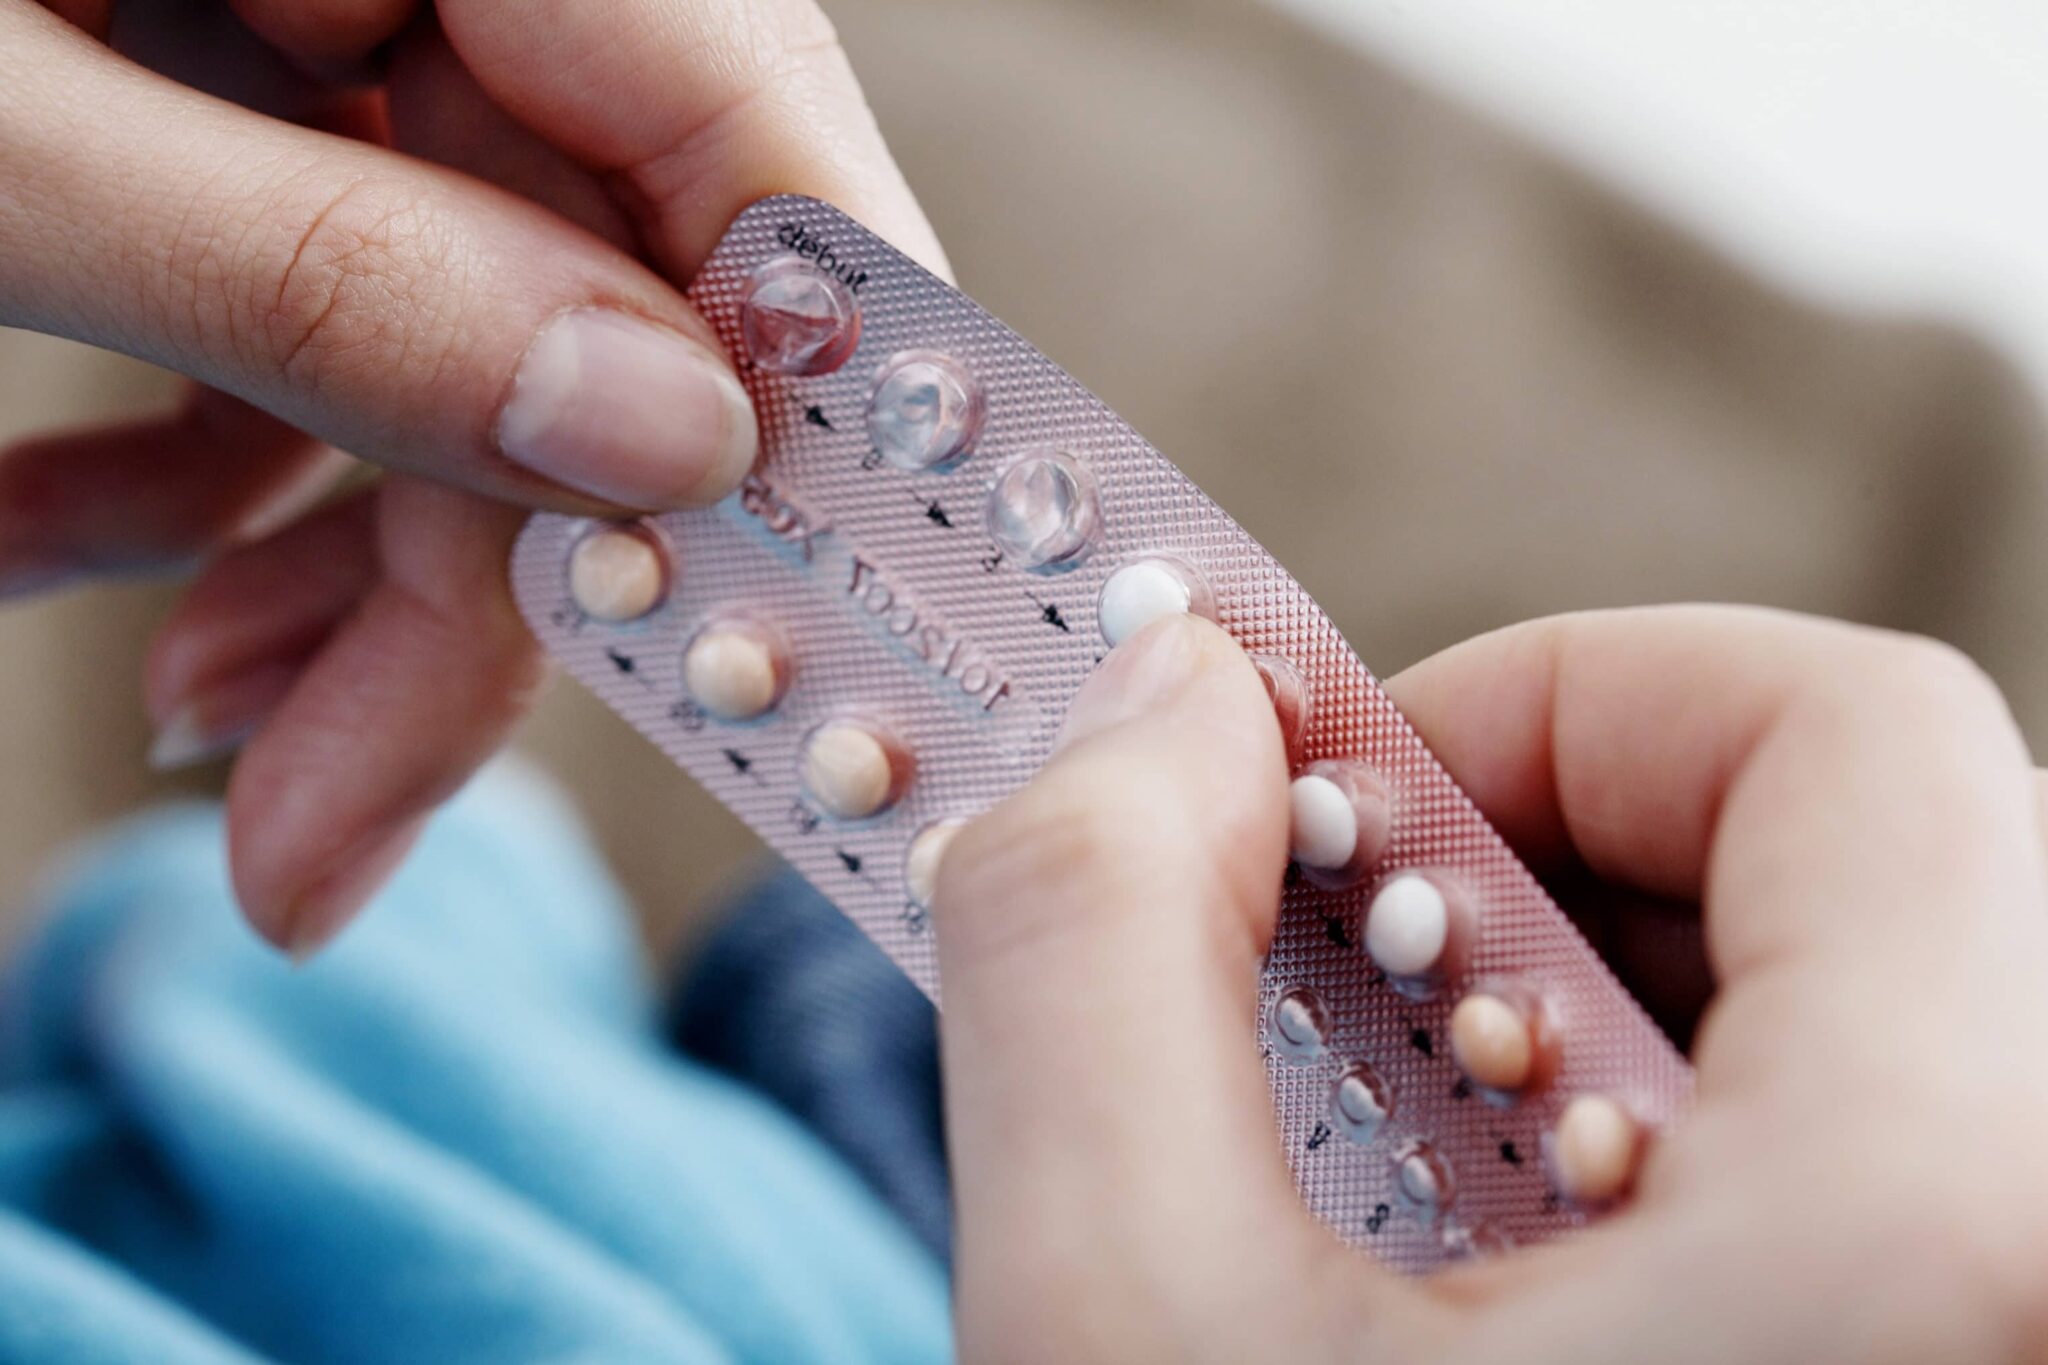 Hands hold a package of birth control pills, pressing their thumb into a blister on the first row of the package.